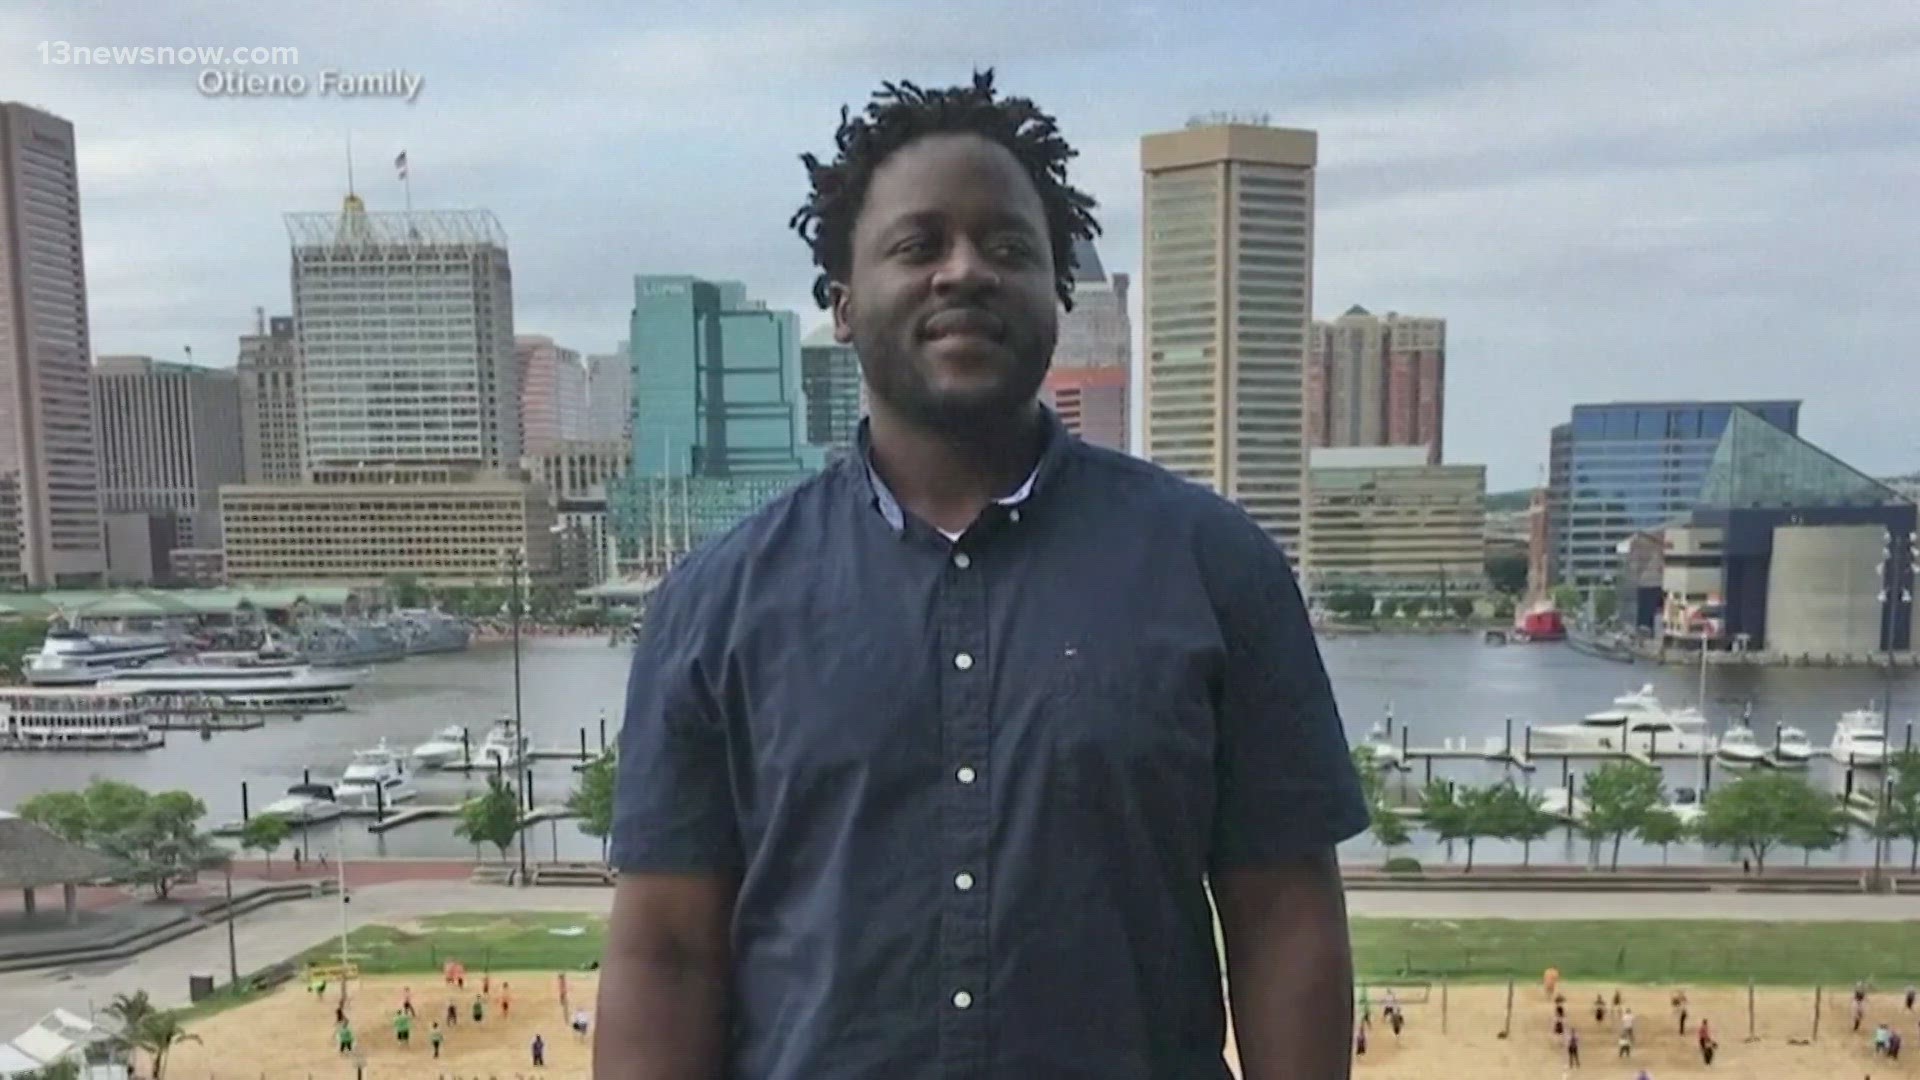 There are national calls for answers after a Virginia man died in custody in Henrico County.